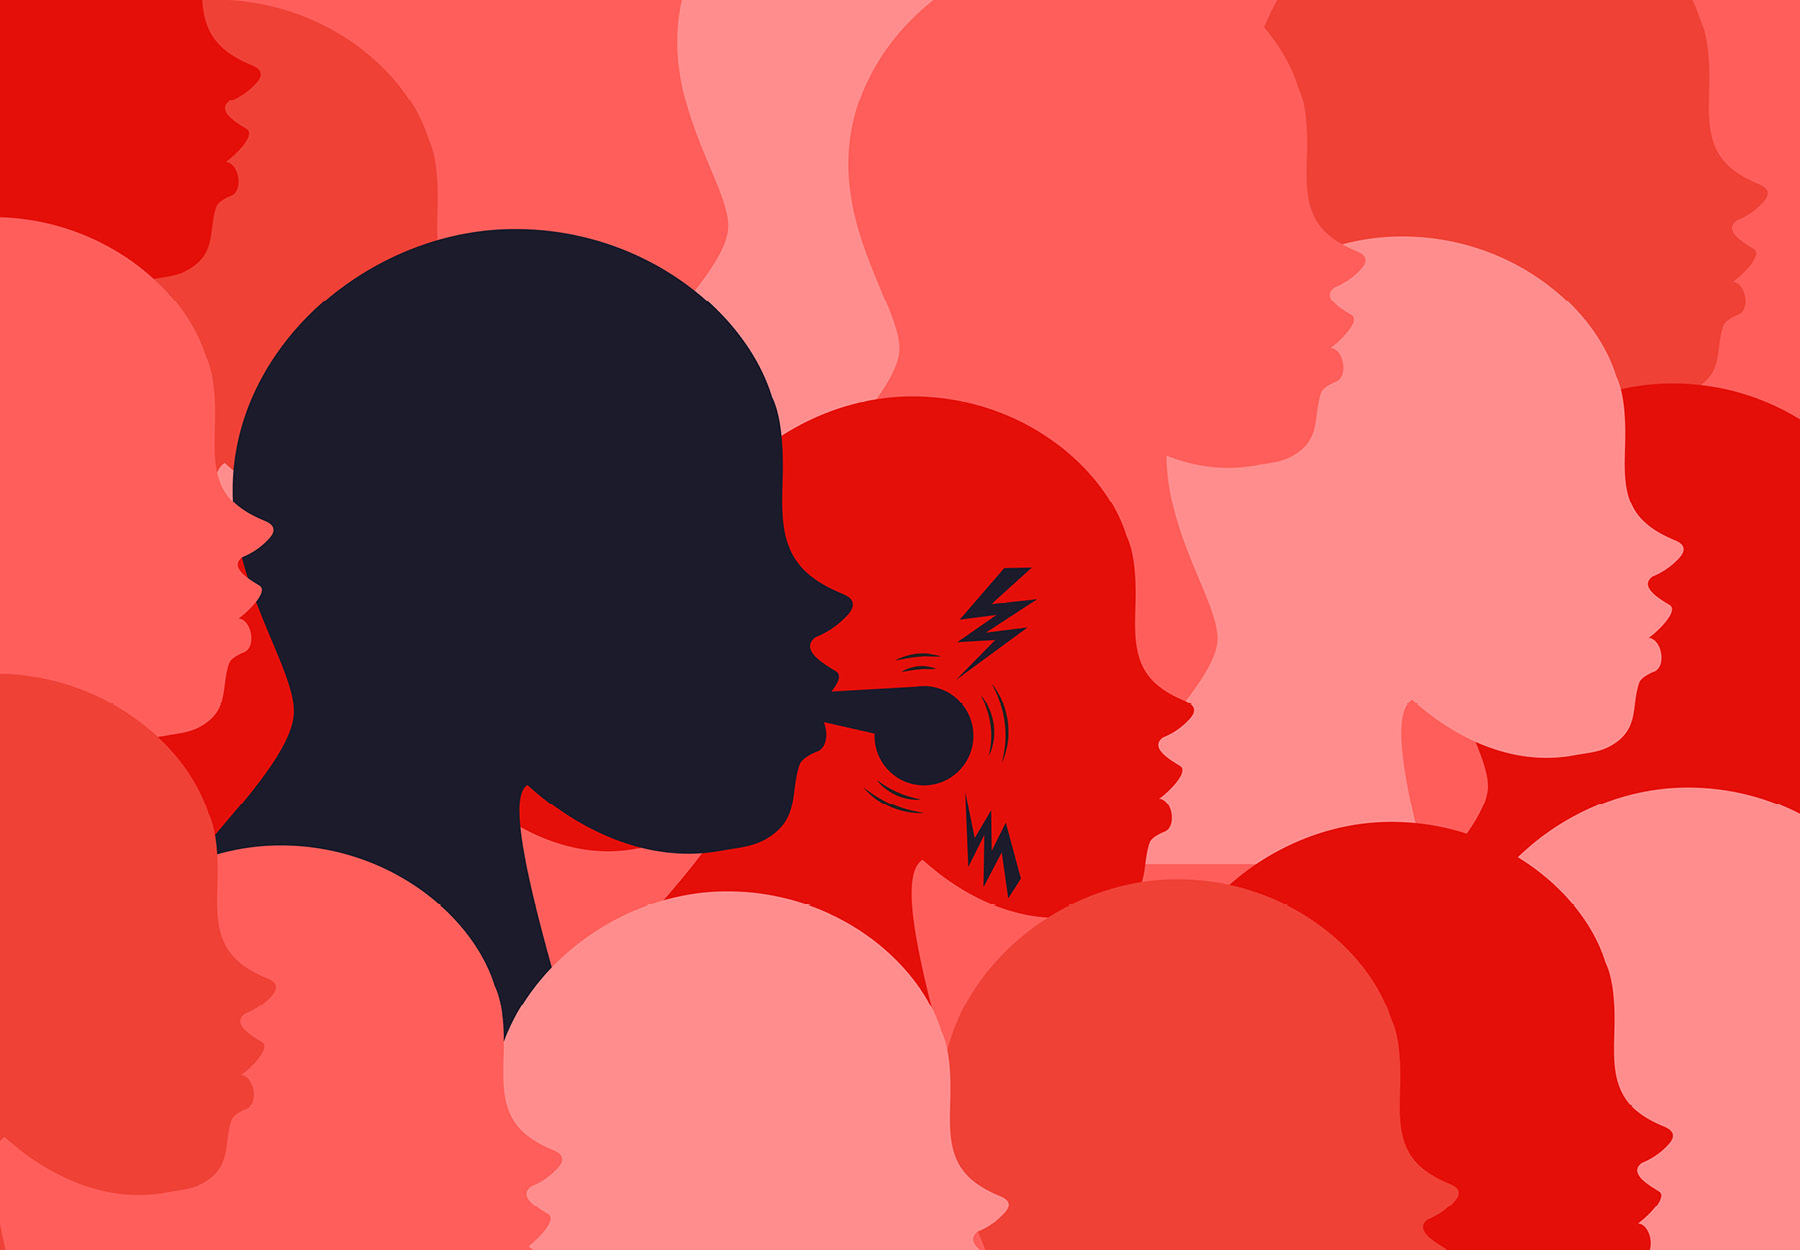 Illustration of the black silhouette of a person blowing a whistle among the silhouettes of several other people in various shades of red. Whistleblower concept. Stock illustration.